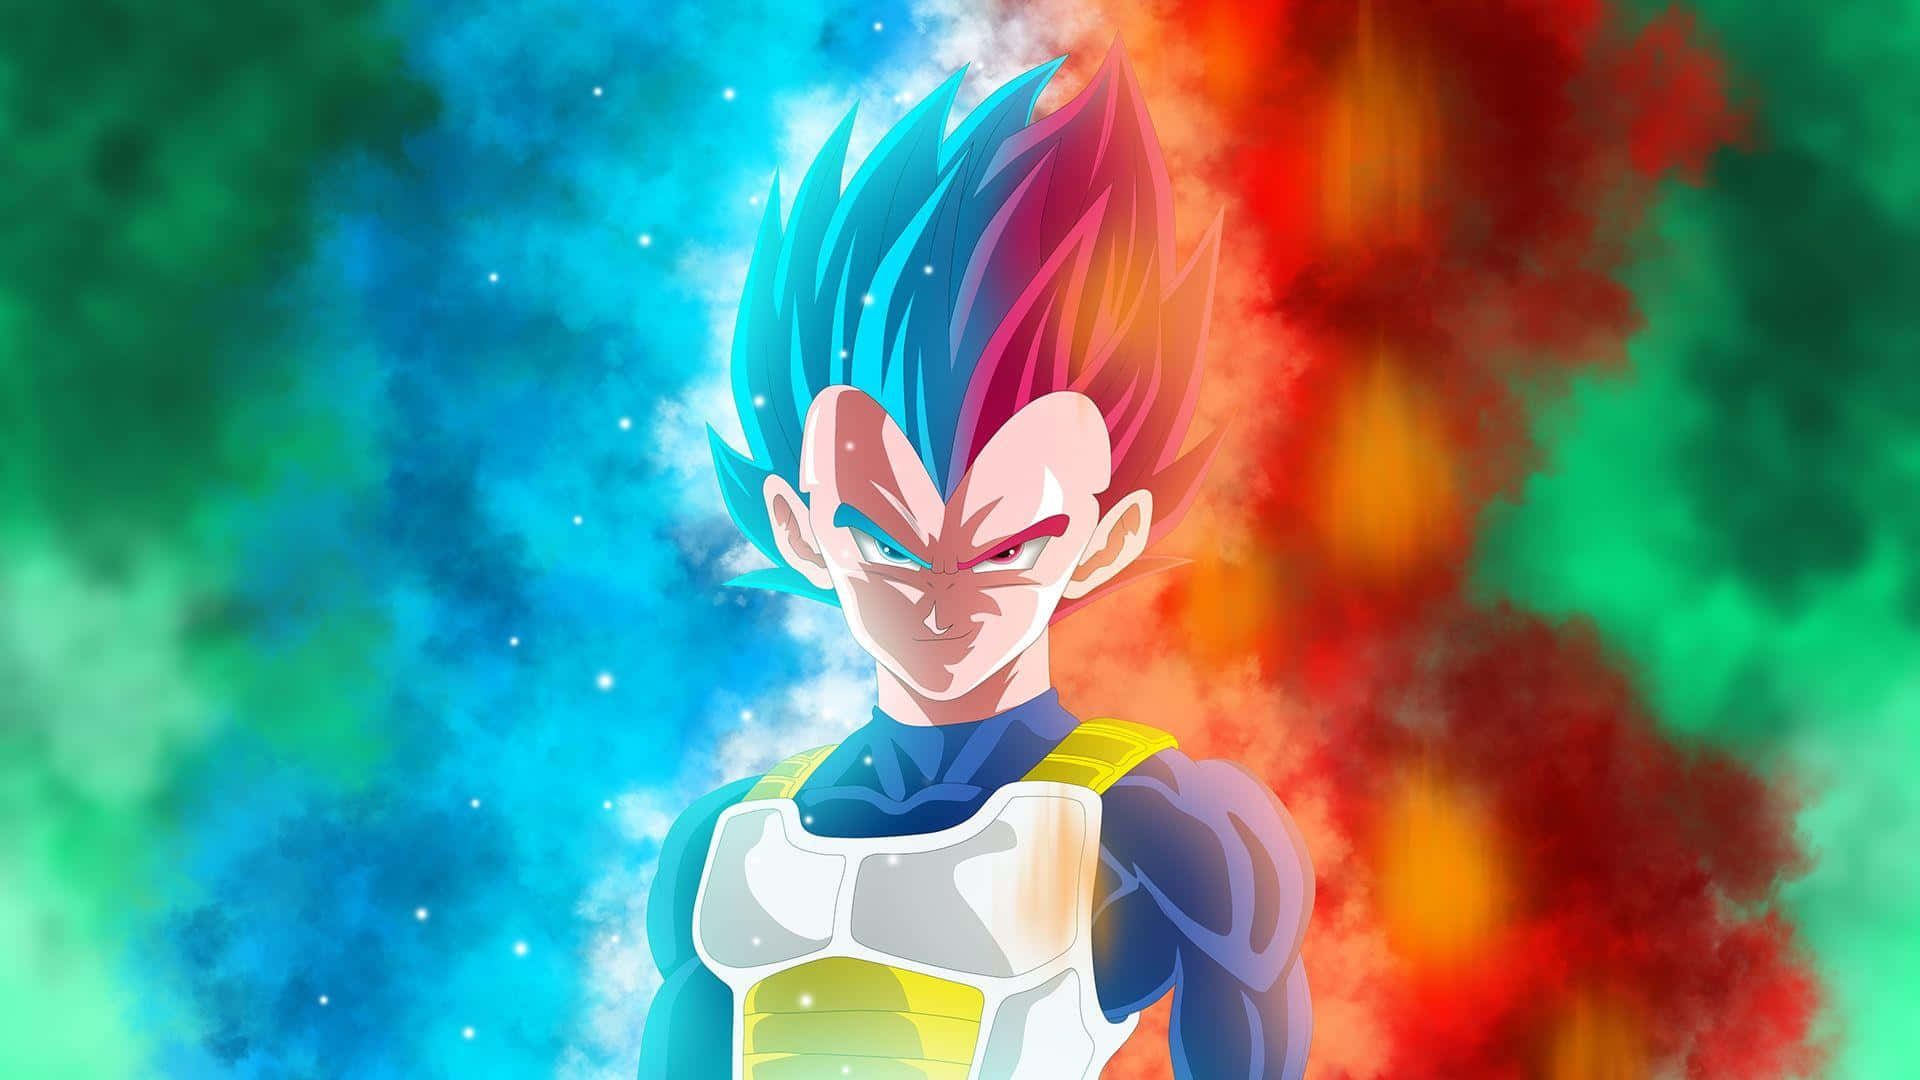 Super Saiyan Blue, Also Known As Super Saiyan God Super Saiyan, Is A Transformation That Appears In The Dragon Ball Series. In This Form, The Saiyan's Hair Turns Blue, And Their Aura Becomes A Bright, Electric Blue Color. It Is Considered To Be One Of The Most Powerful Forms Of Saiyan Transformation. The Super Saiyan Blue Form Was First Introduced In The Movie 